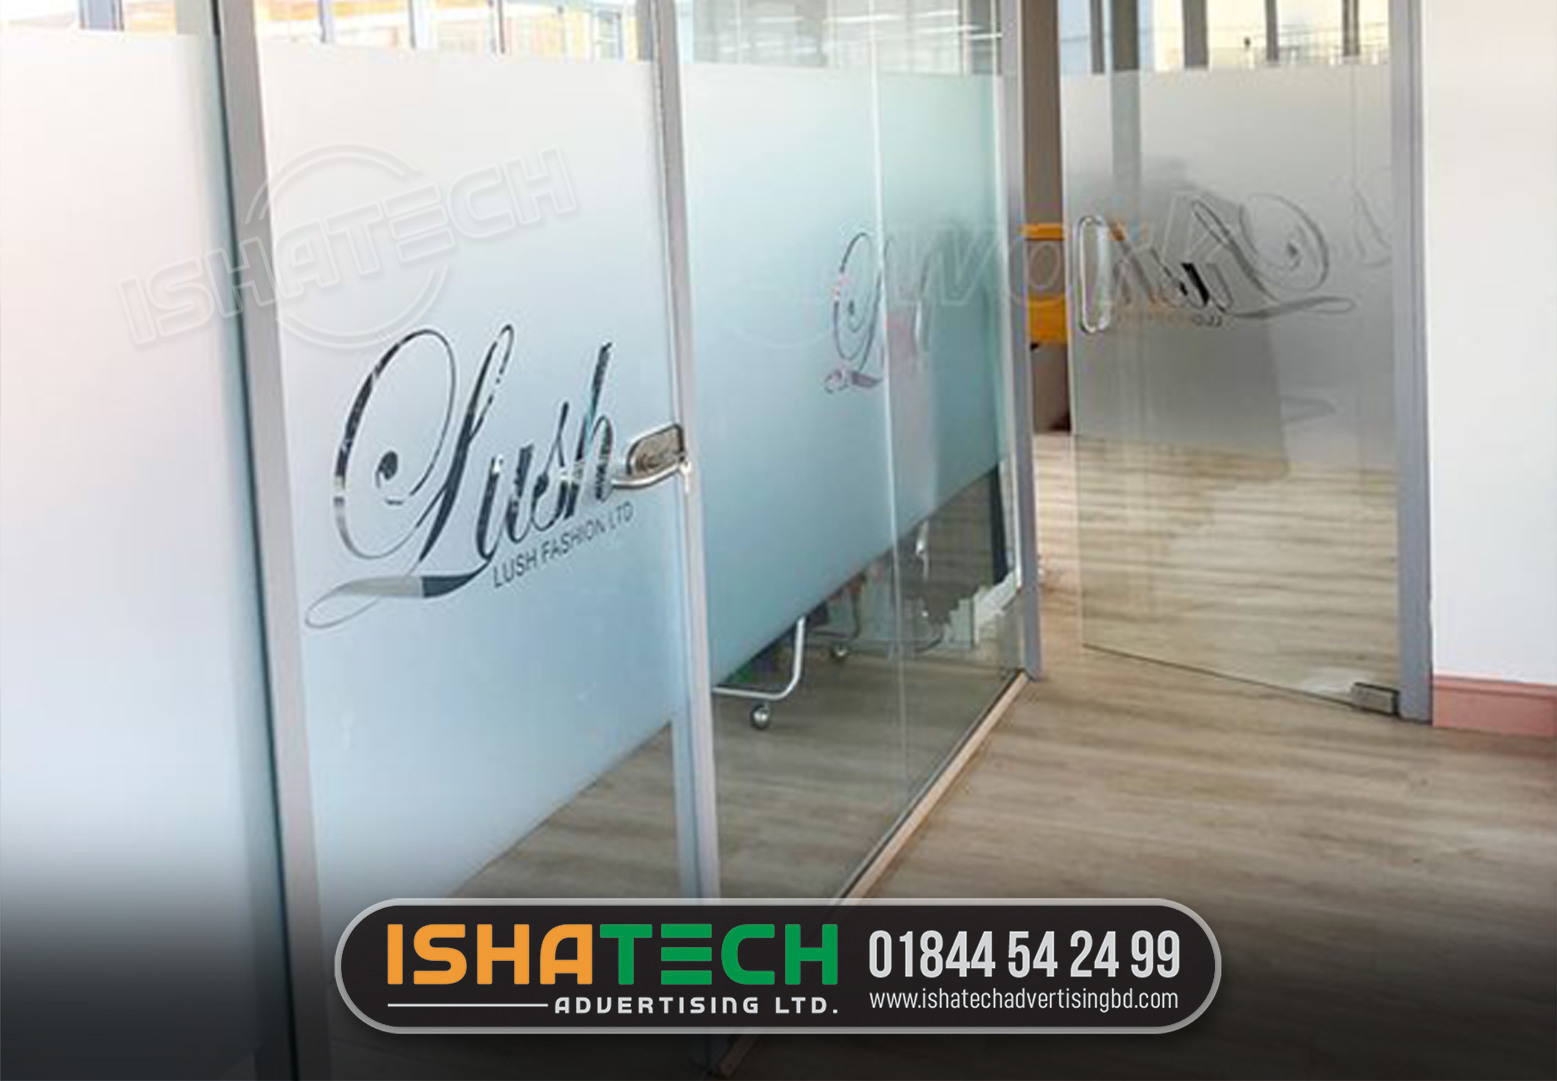 Office & Restaurant Glass Clear Frosted Sticker Print & Pasting Price in Bangladesh. @ Address: Dhaka @ Complete by #IshaTech_Advertising_Ltd @ Terms and Conditions: Three Years Service’s with Materials Warranty. ?Contact us for more information: Cell: 01844 - 542 499, 01844 - 542 498 ?Visit our Sent: E-mail: ishatech.advertising@gmail.com E-mail: info@ishatechadvertisingbd.com ?Corporate Office: 04-B/A, (2nd Floor), Mazar Road, Sector-1, Mirpur, Dhaka-1216. ?Factory Address: 44/B, (1st Floor), 2nd Colony, Dadar Bari, Mirpur-1, Dhaka-1216 ?To Visit Our Page: Website: www.ishatechadvertisingbd.com